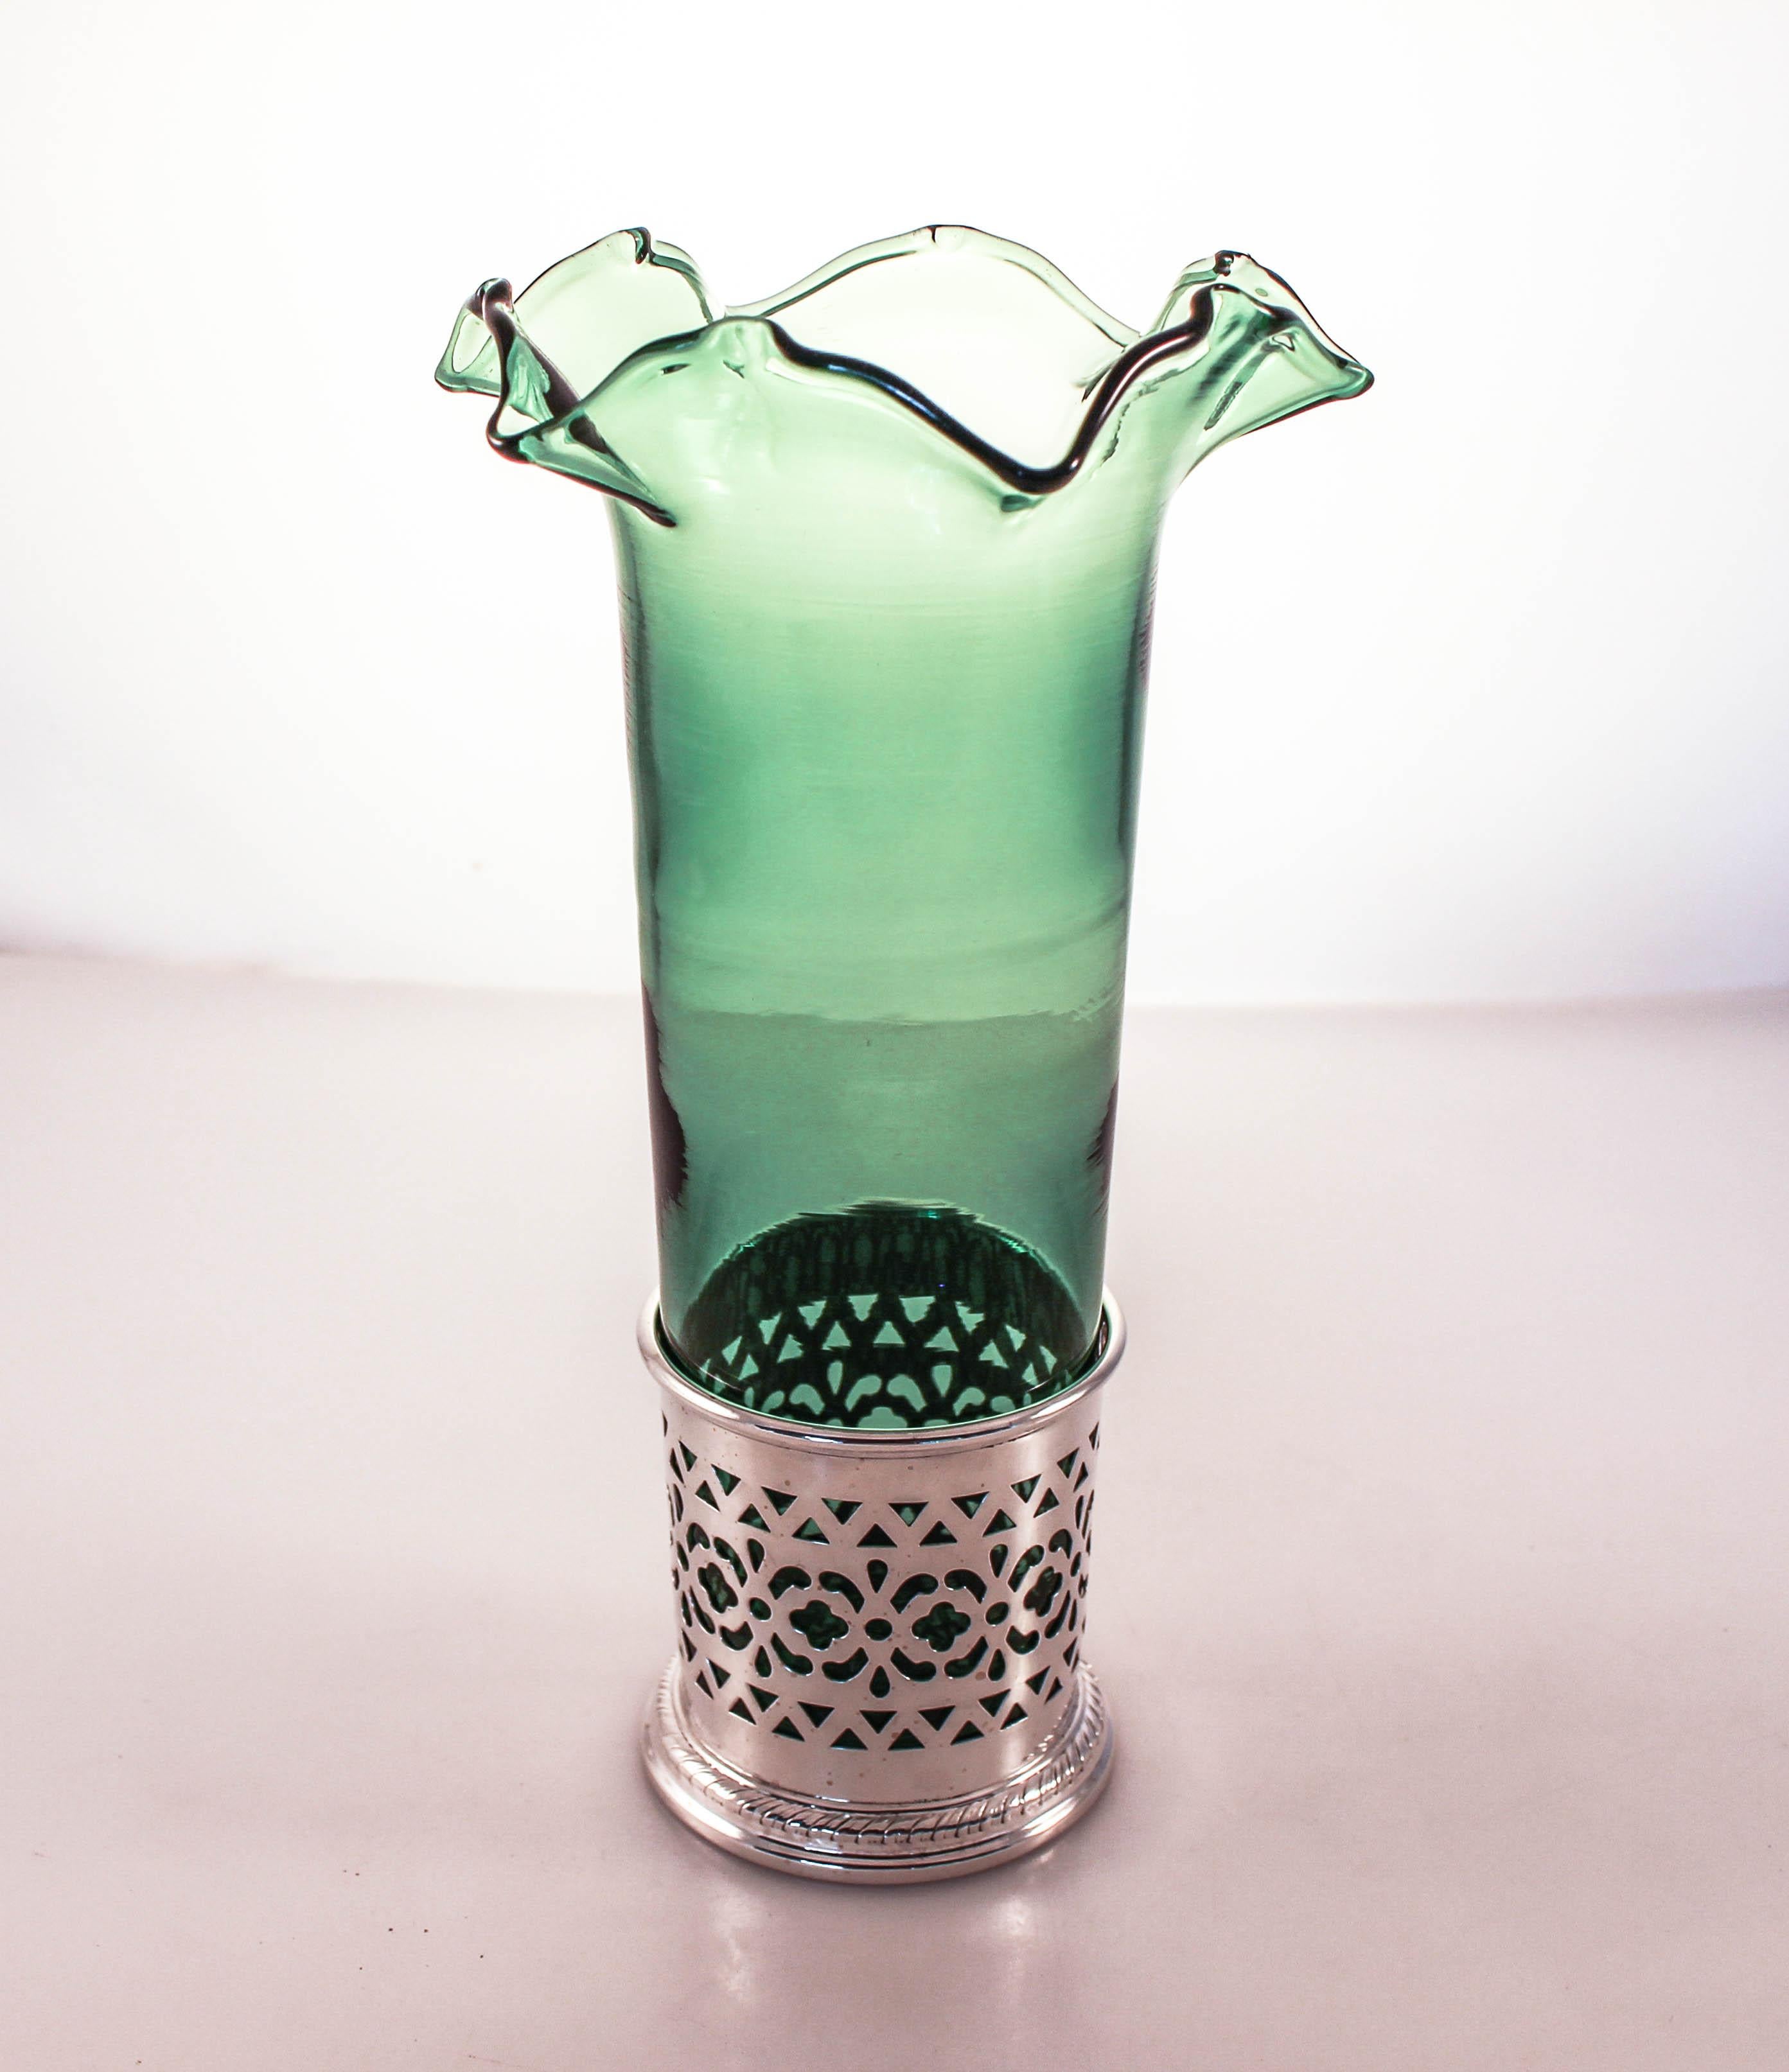 We are delighted to offer this pair of sterling silver vases with green glass liners. Made by the Meriden Britannia Co of Connecticut, the silver vase has a beautiful latticework pattern and rising up from within is a luscious green glass insert. It